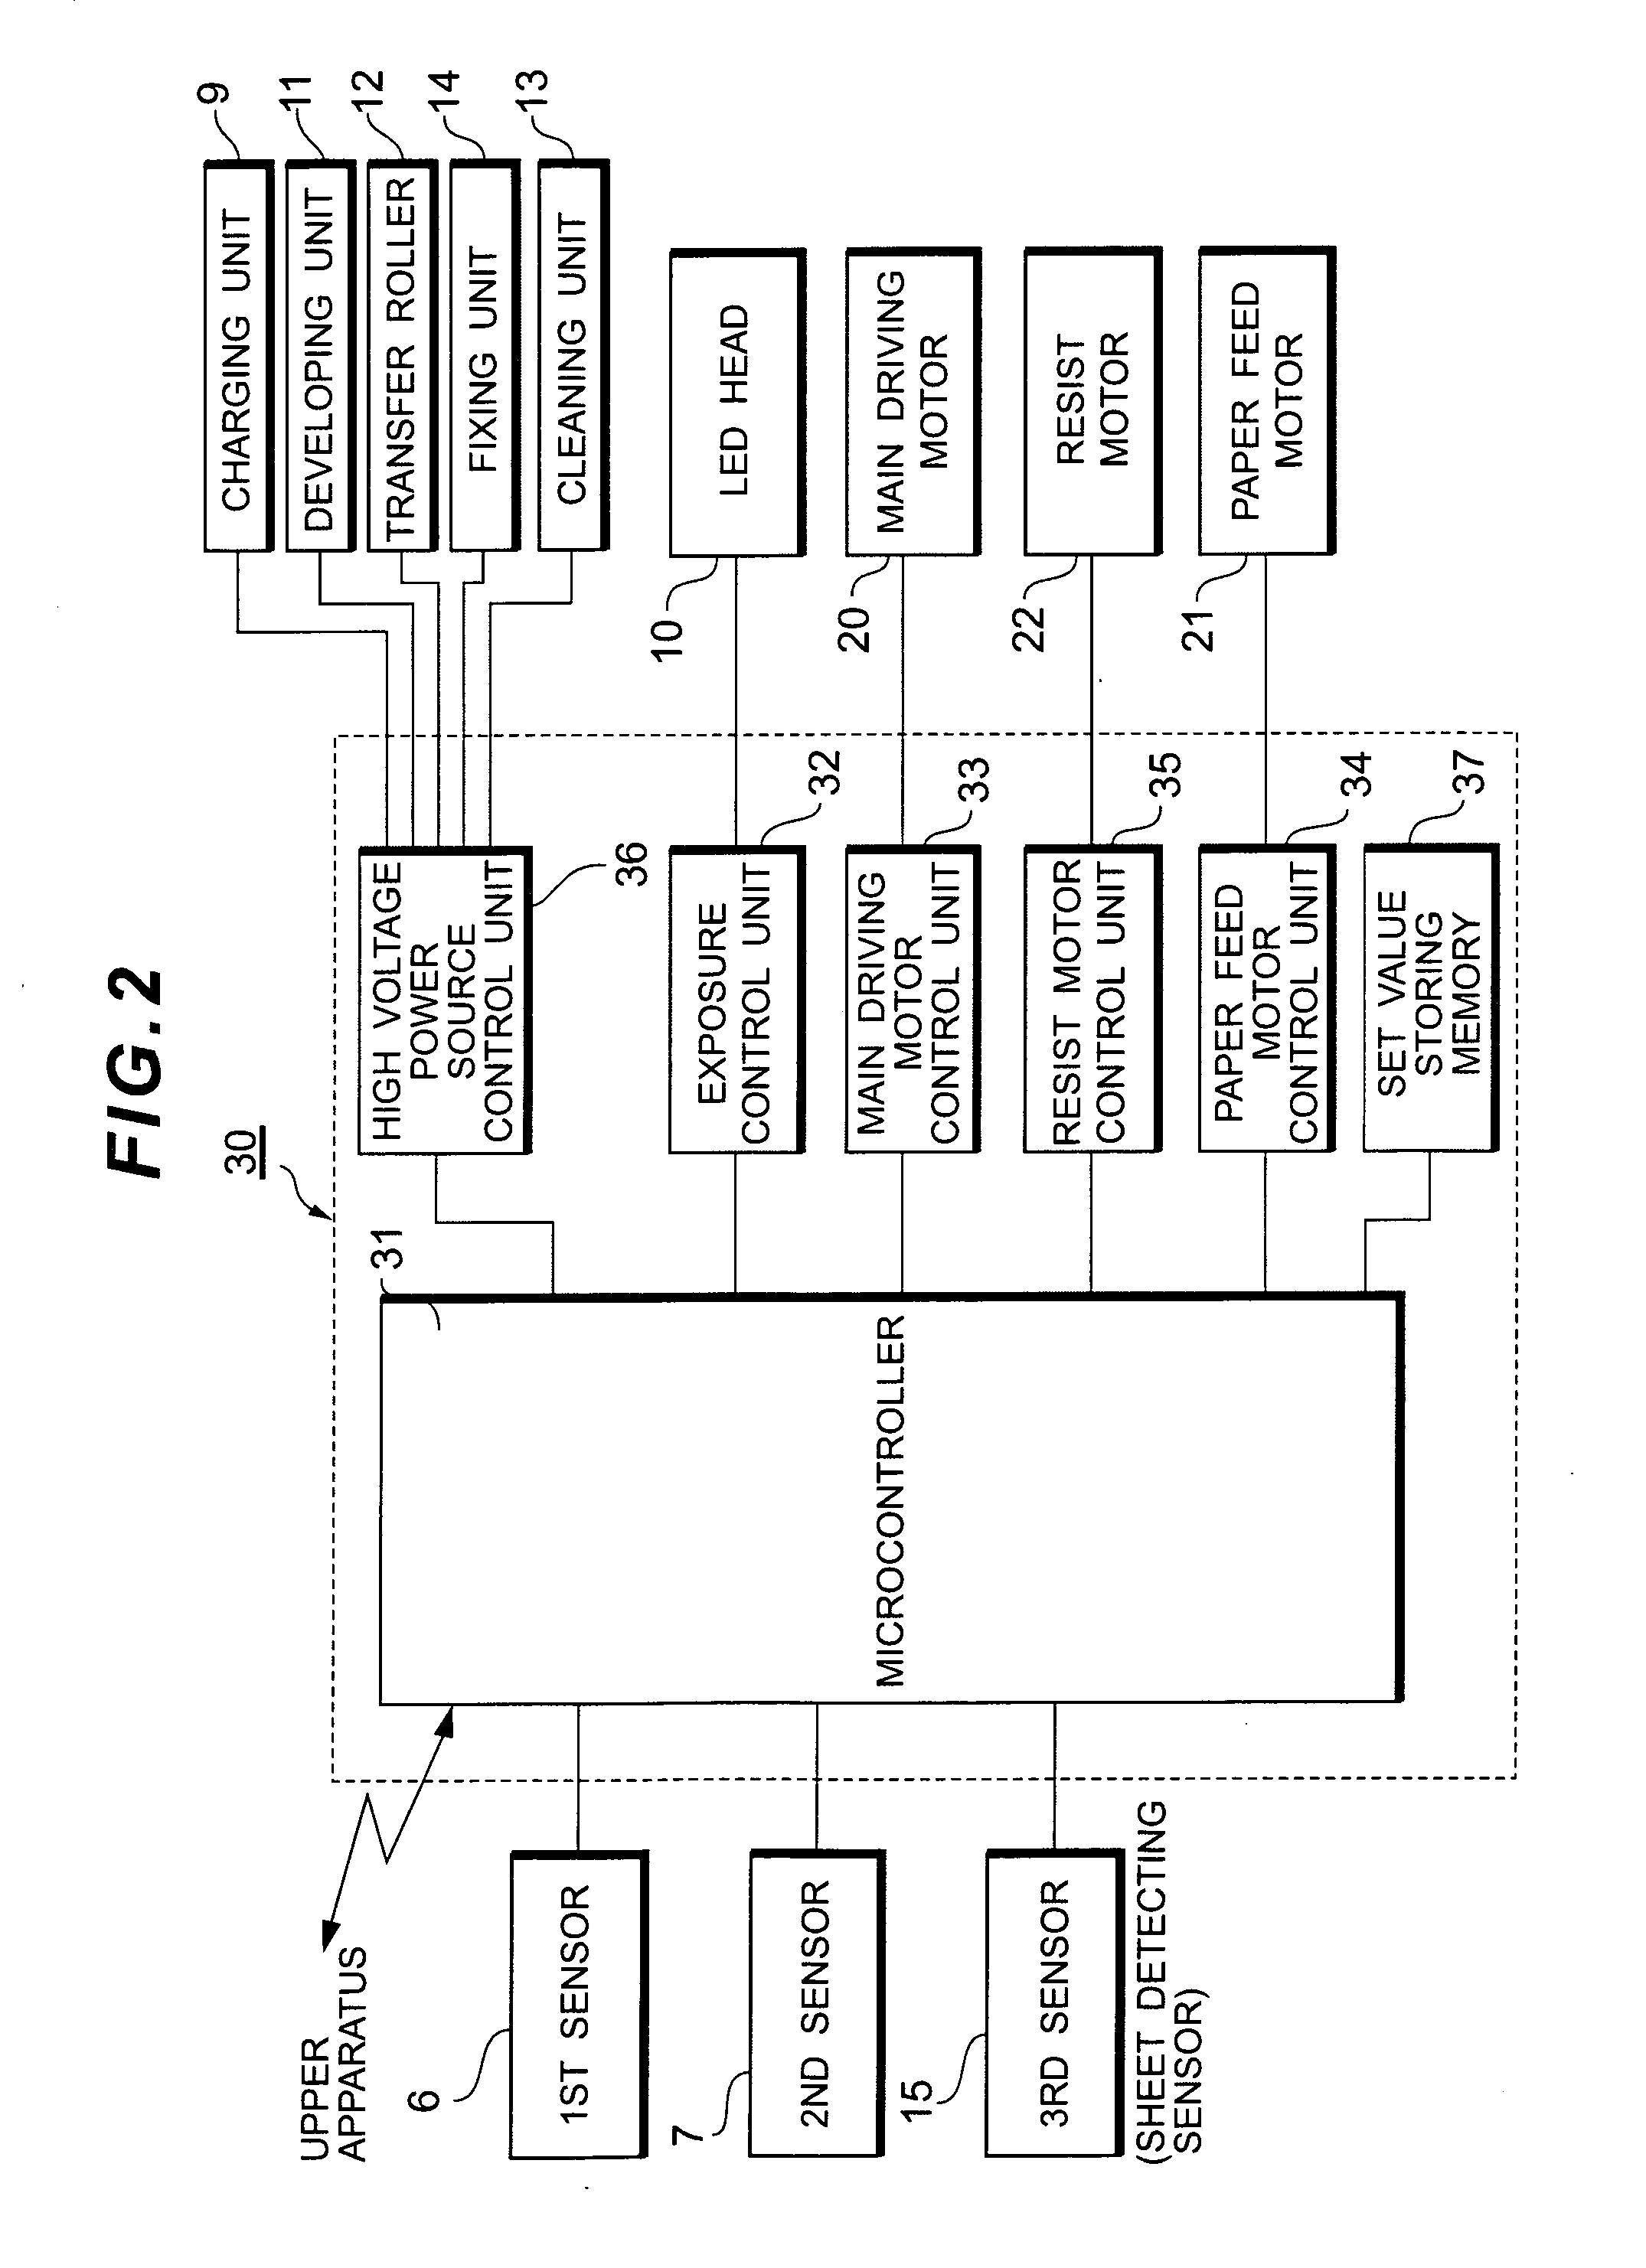 Image recording apparatus and its control method